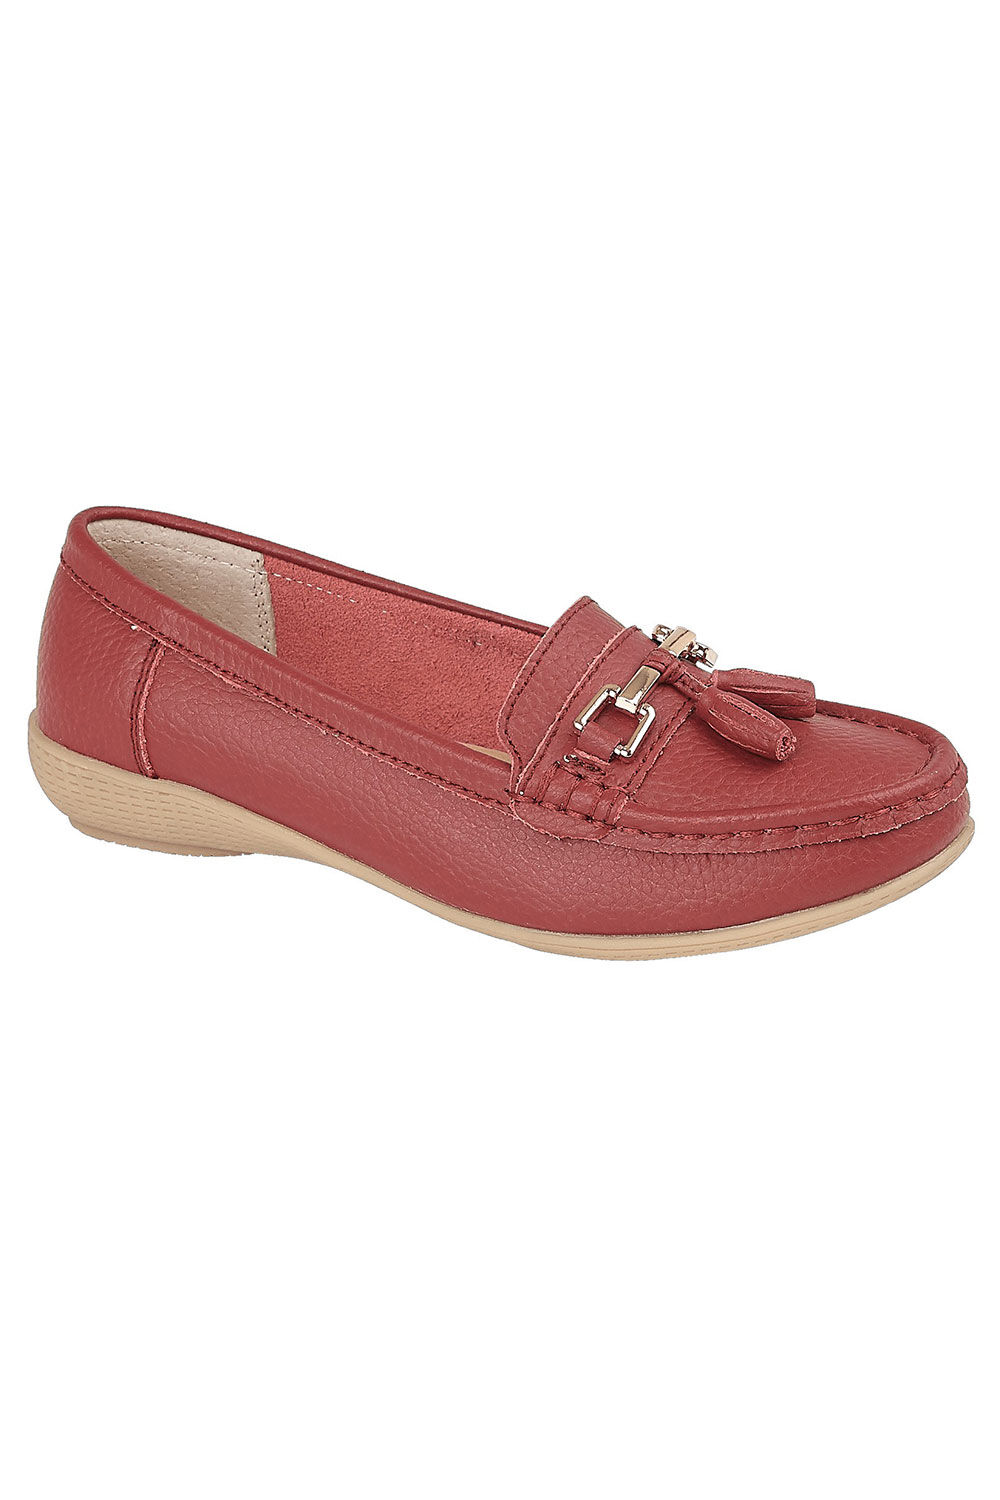 Jo & Joe Red Moccasin Shoes With Tassel Detail, Size: 6